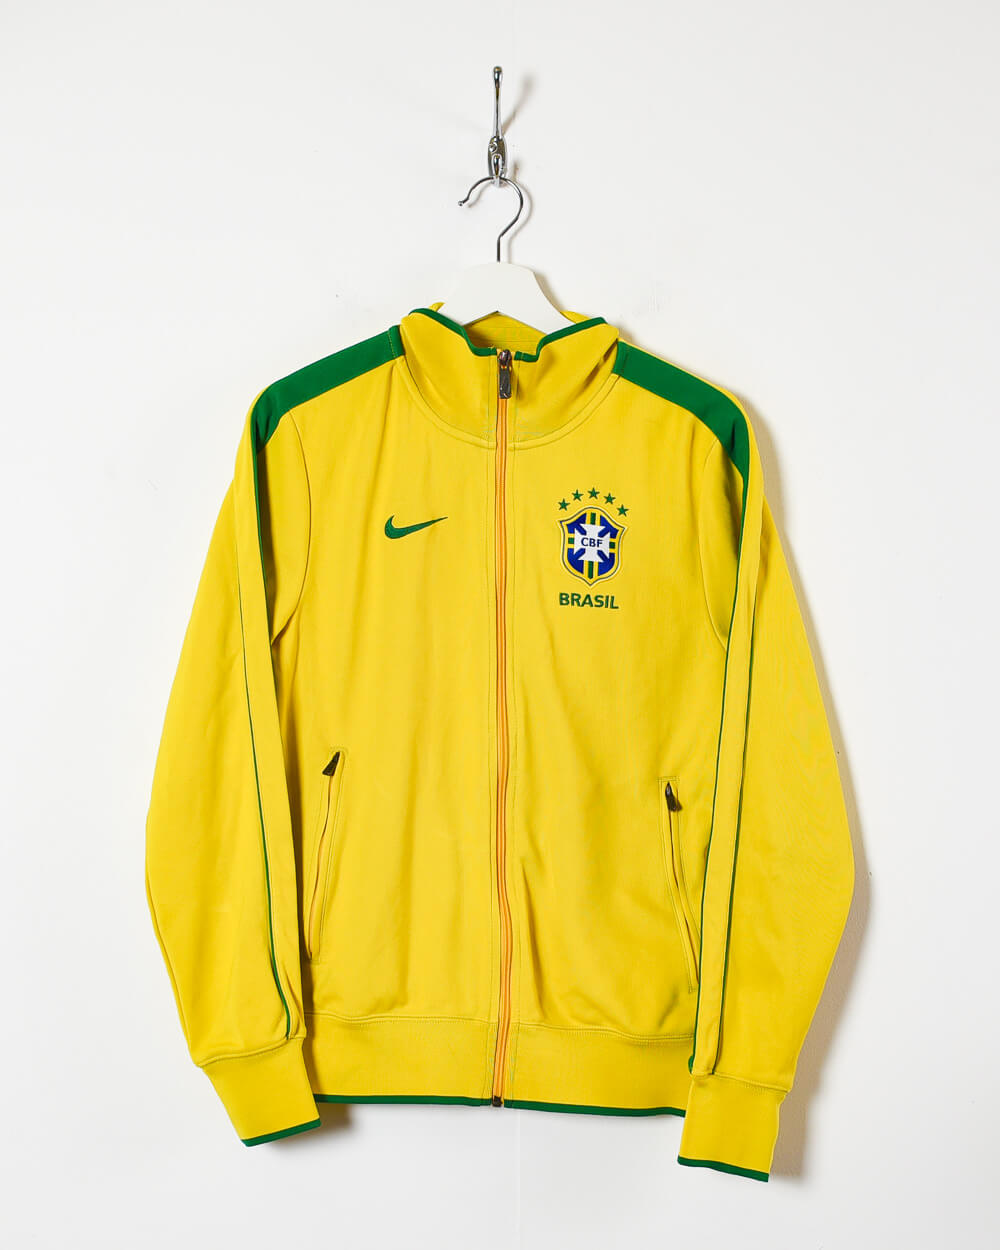 Nike Brasil Vintage Official Adult's Football Team Tracksuit Top Jacket ,  Size S, Green/Yellow